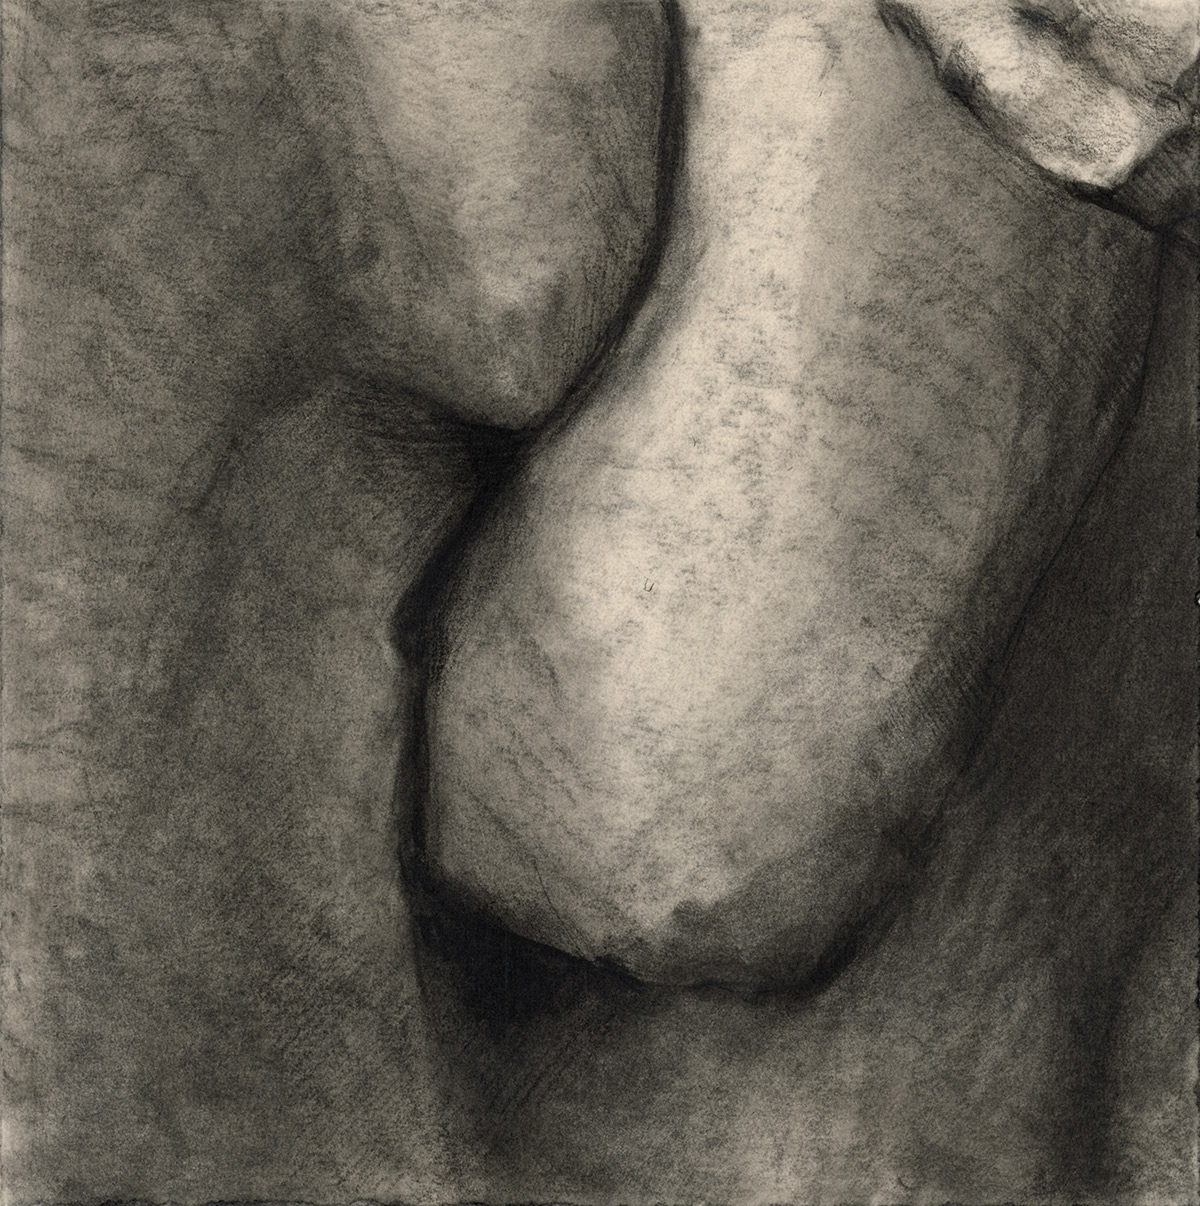 a convolusion of appendage-like shapes drawn in charcoal